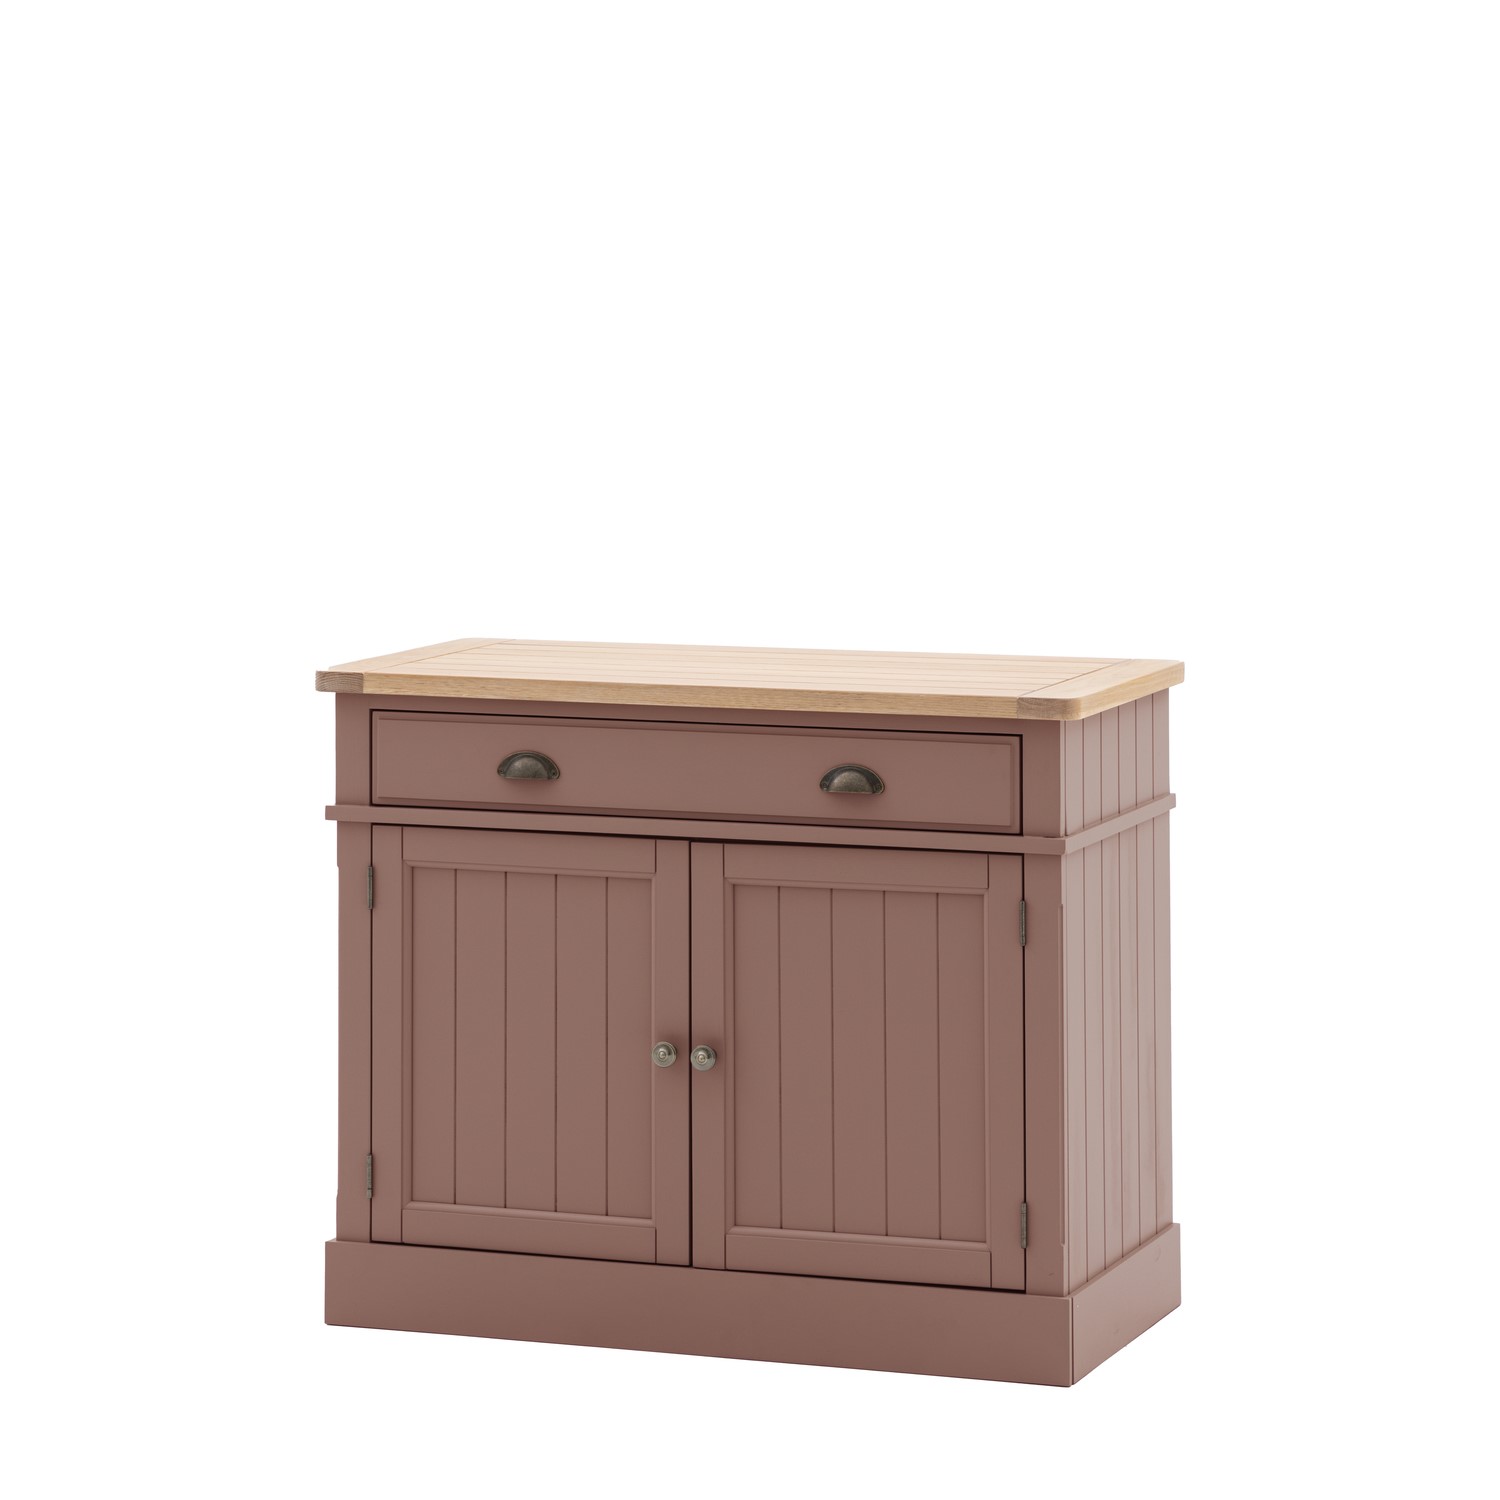 Read more about Eton 2 door sideboard clay caspian house